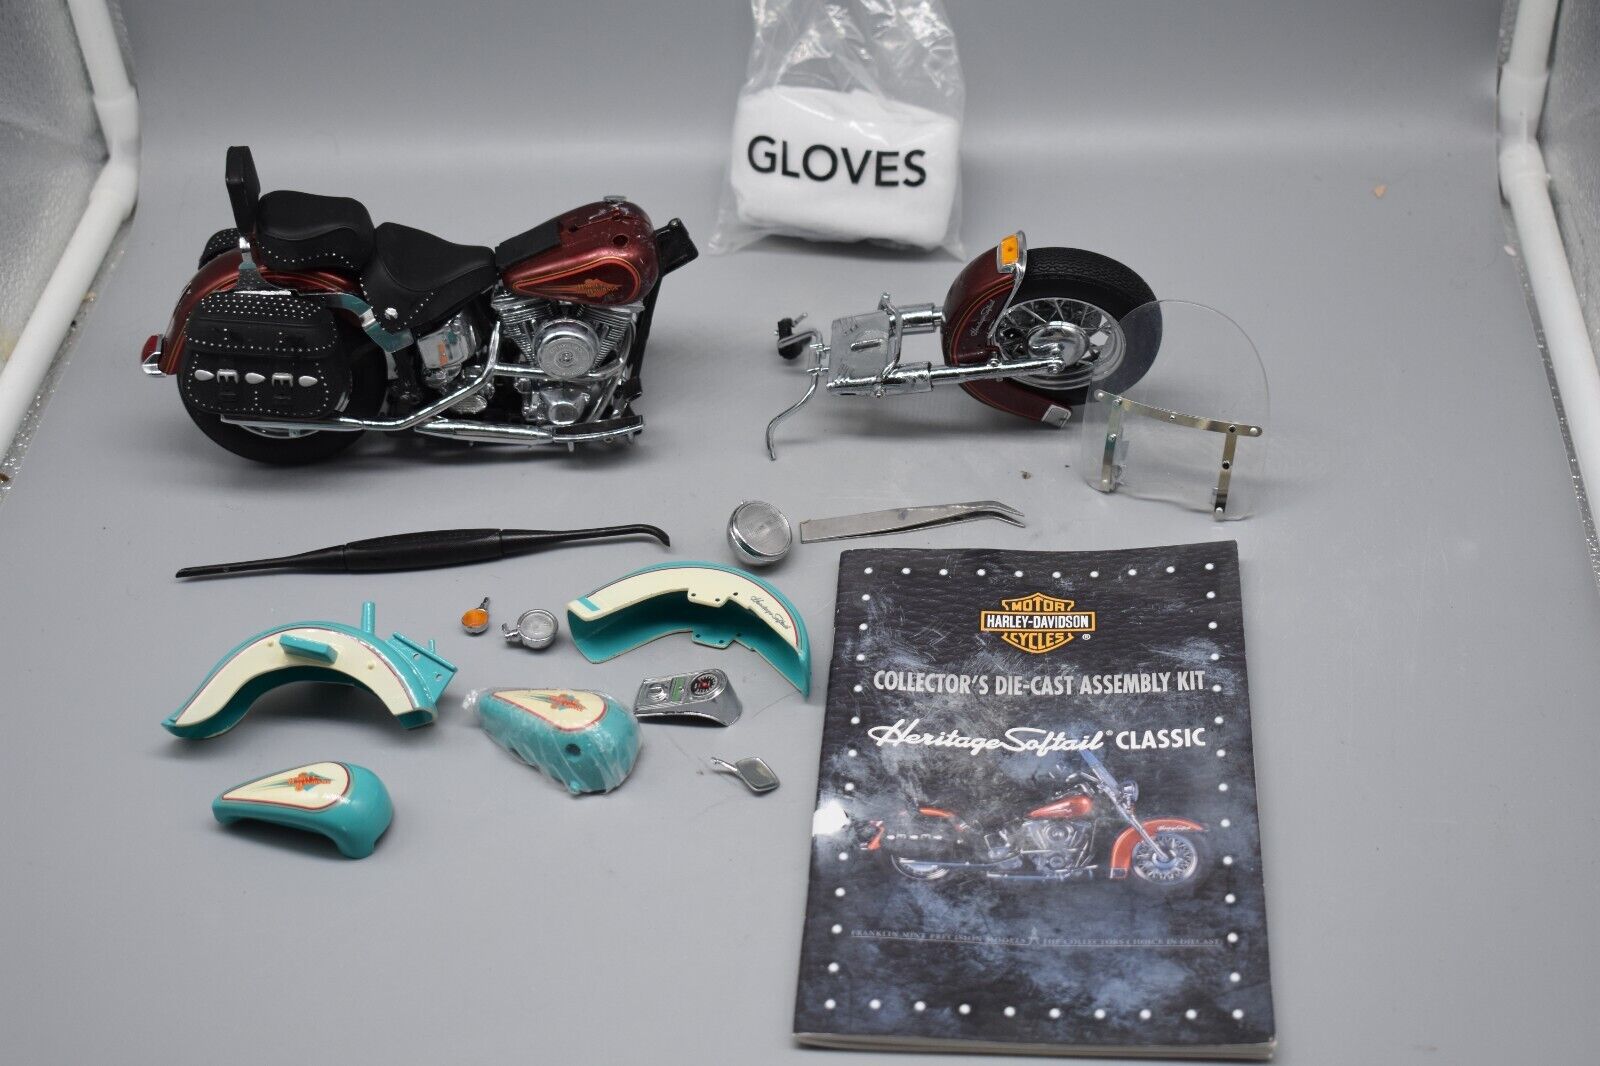 Harley Davidson Heritage Softail Classic Motorcycle Parts.  See photo for items